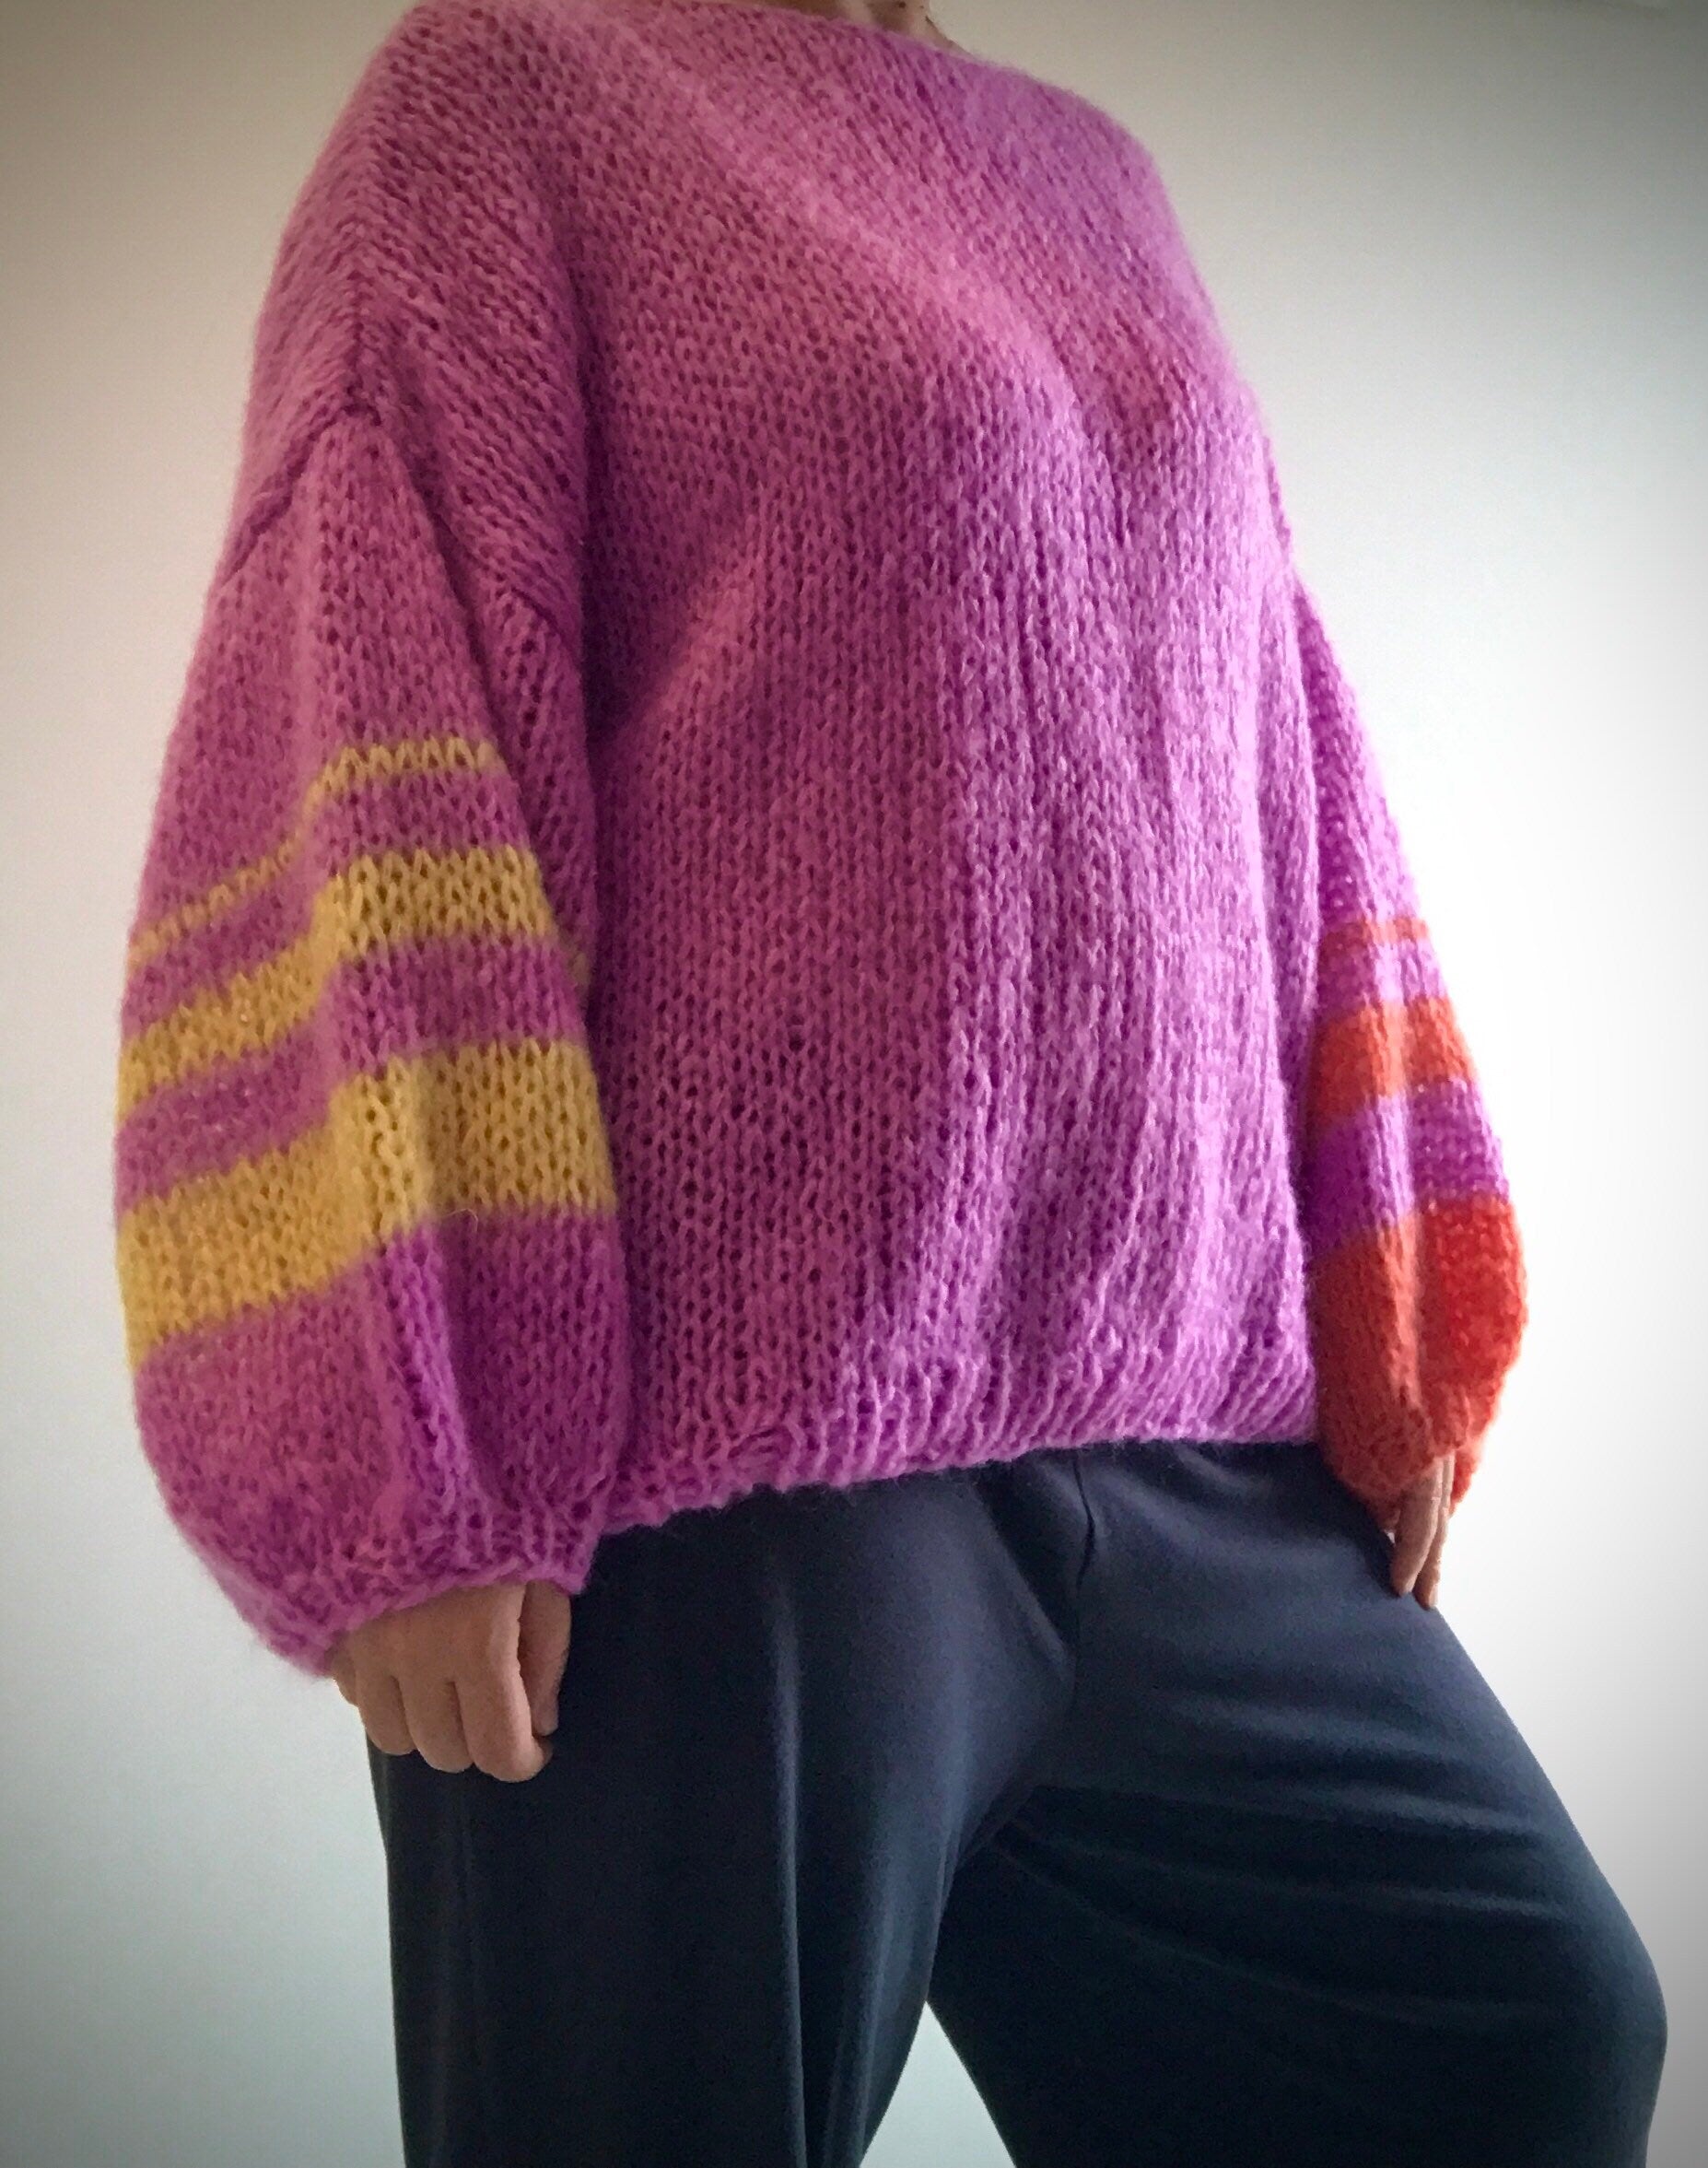 Violet Mohair Sweater, Oversized with Balloon Sleeves, Striped Sleeves, Light Soft Jumper, Purple Oversized Sweater